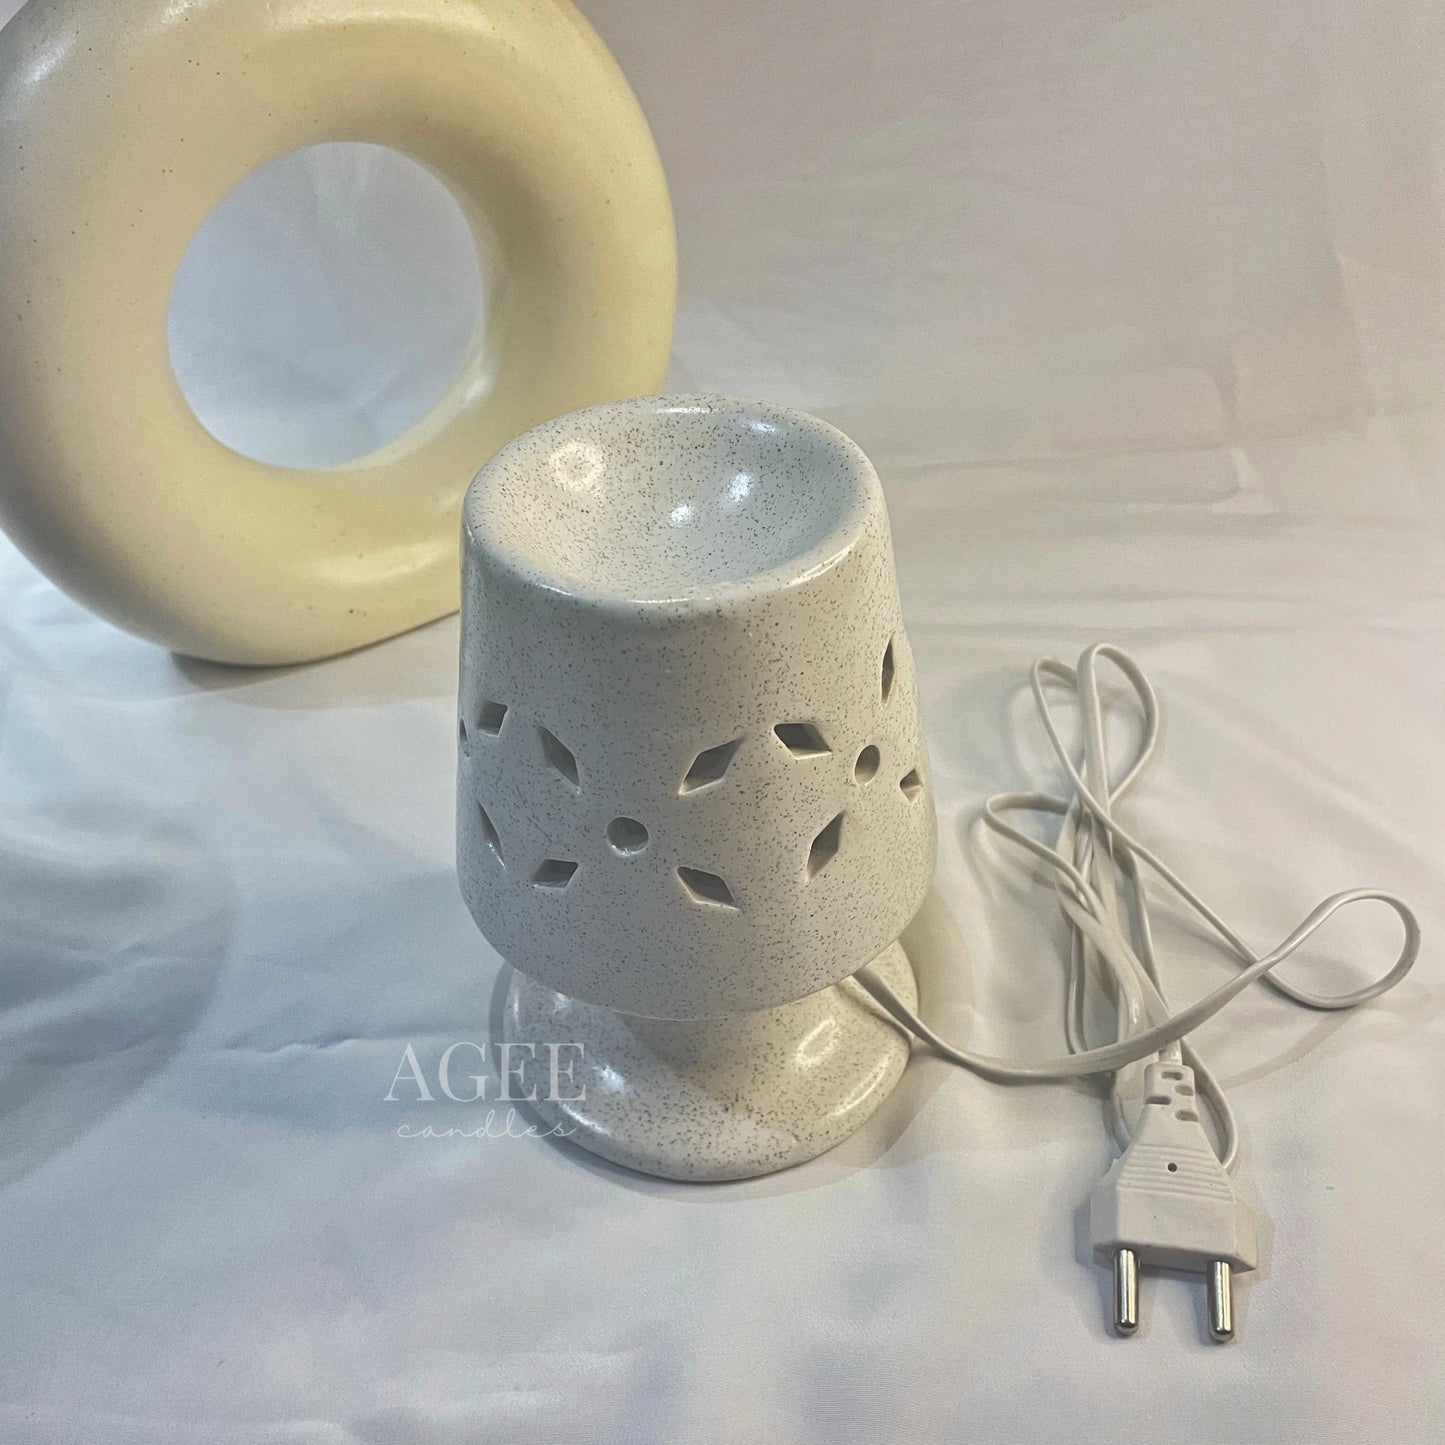 White Lamp Shaped Electric Wax Warmer - AGEE Candles